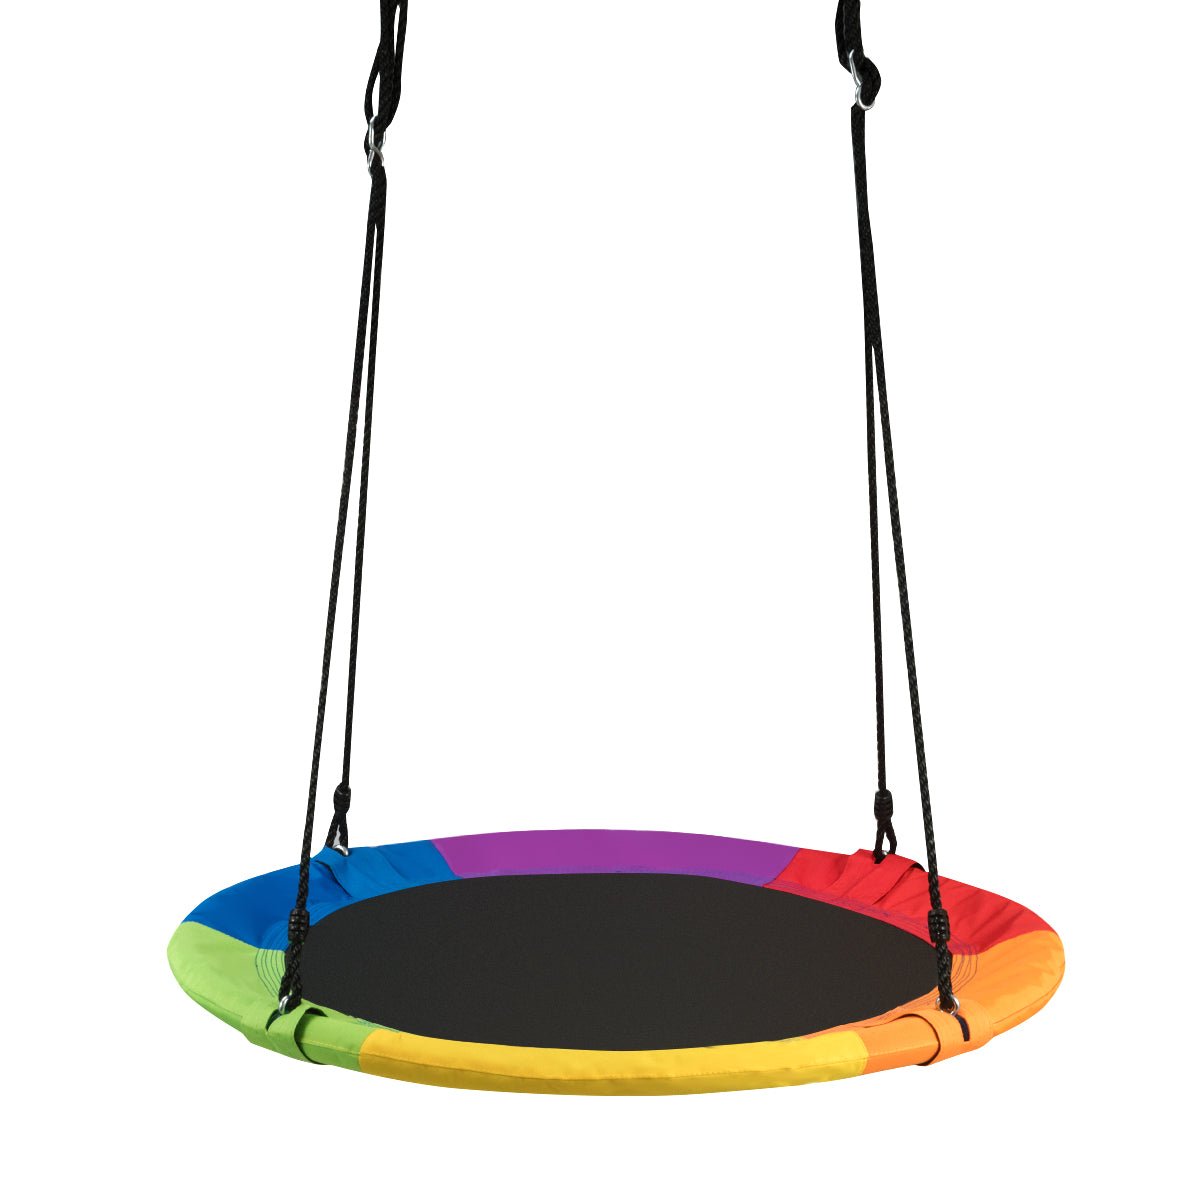 Shop Multi-Color Flying Saucer Swing Seat Accessory for Kids!